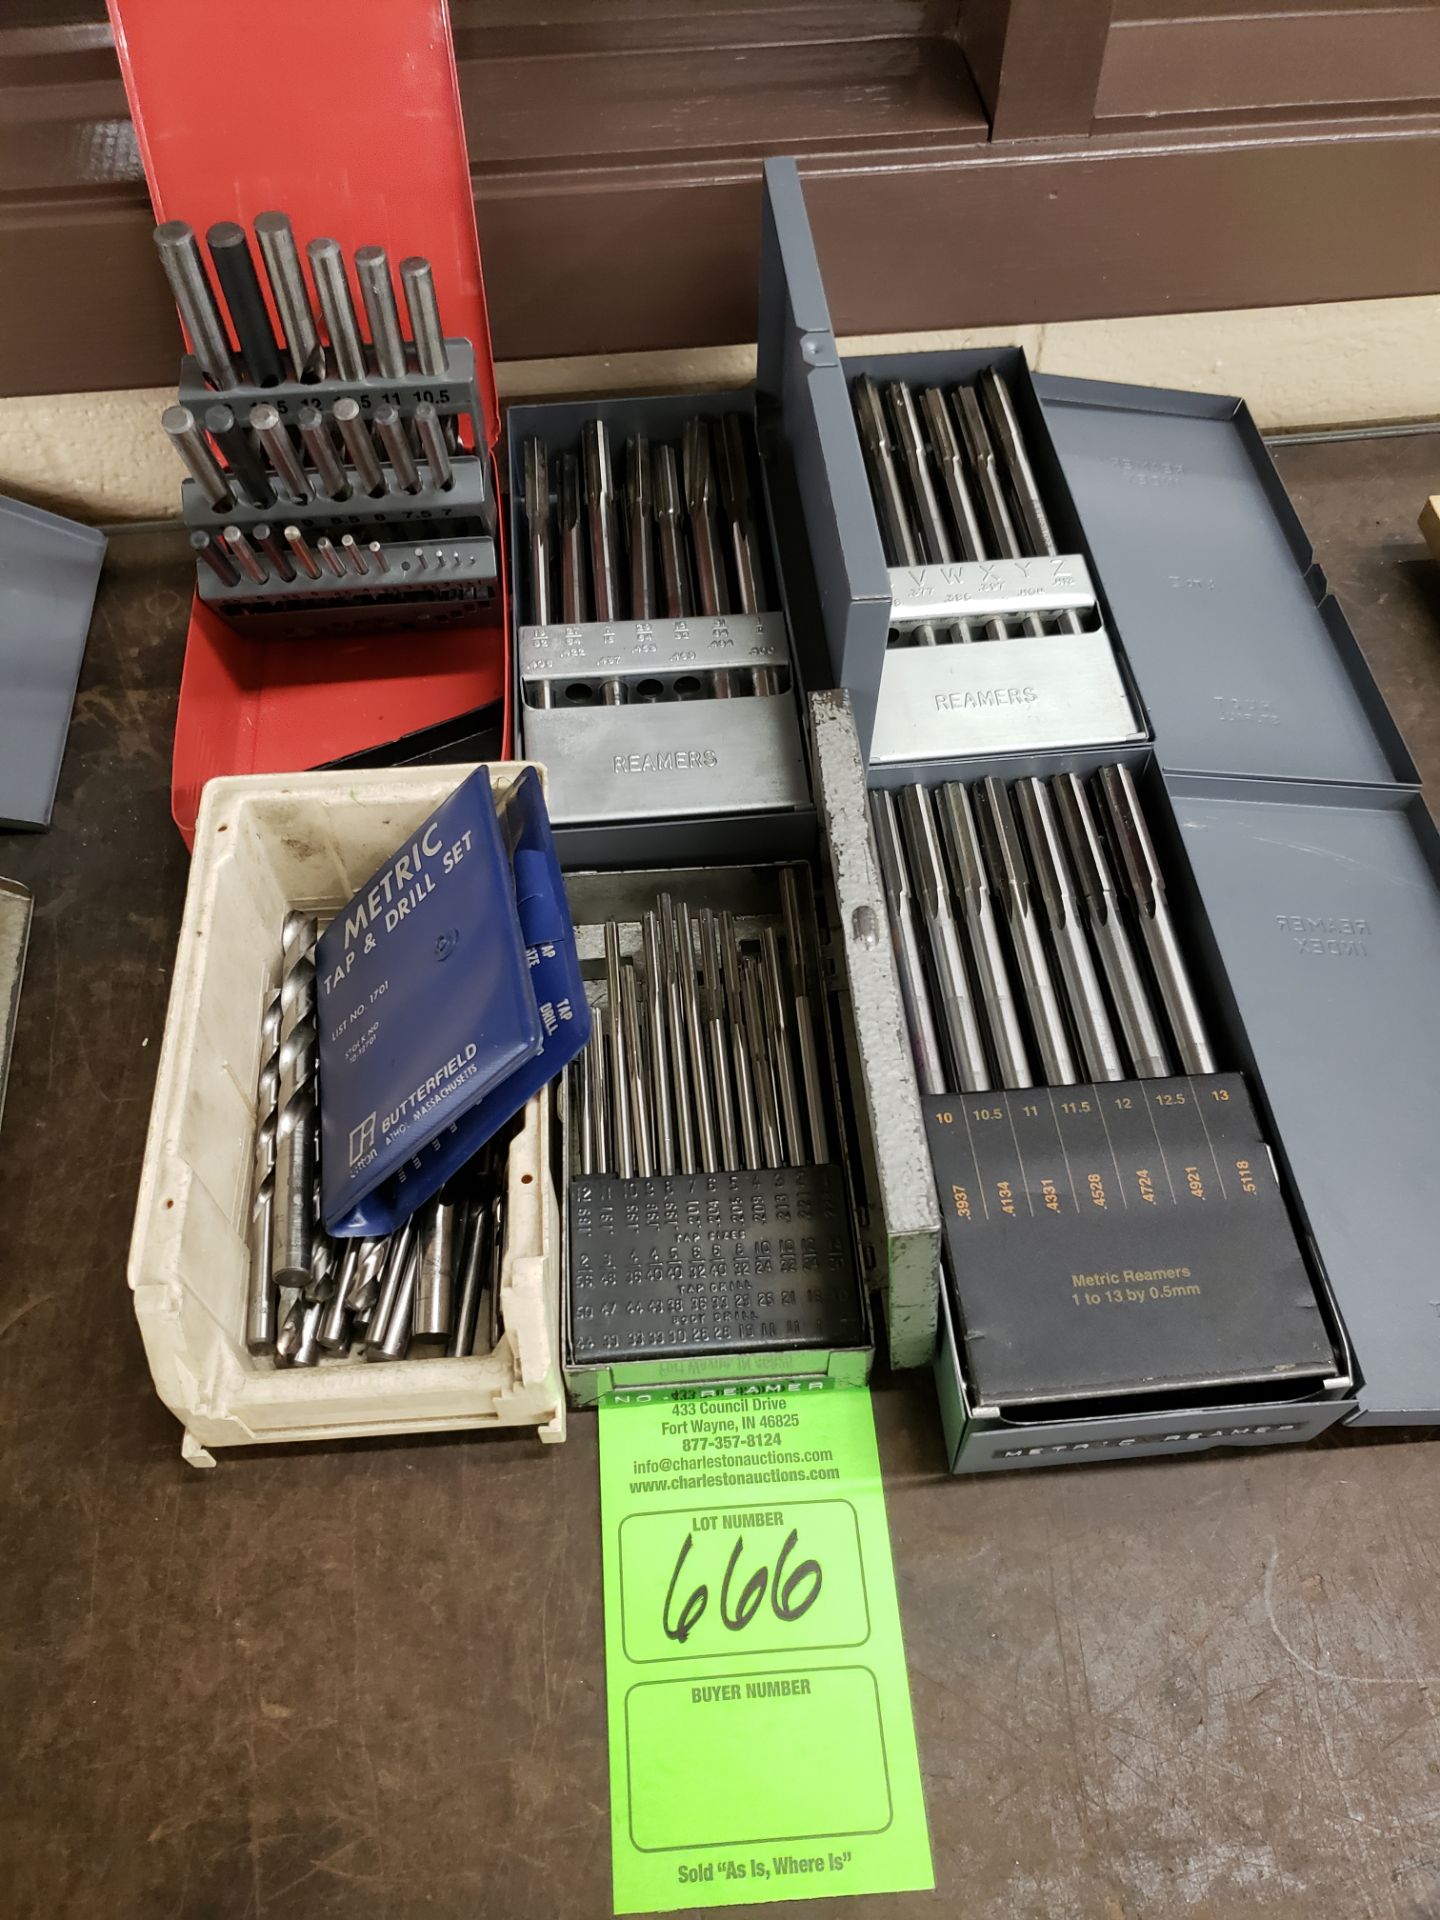 (4) REAMER SETS (2) BOXES OF VARIOUS DRILLS